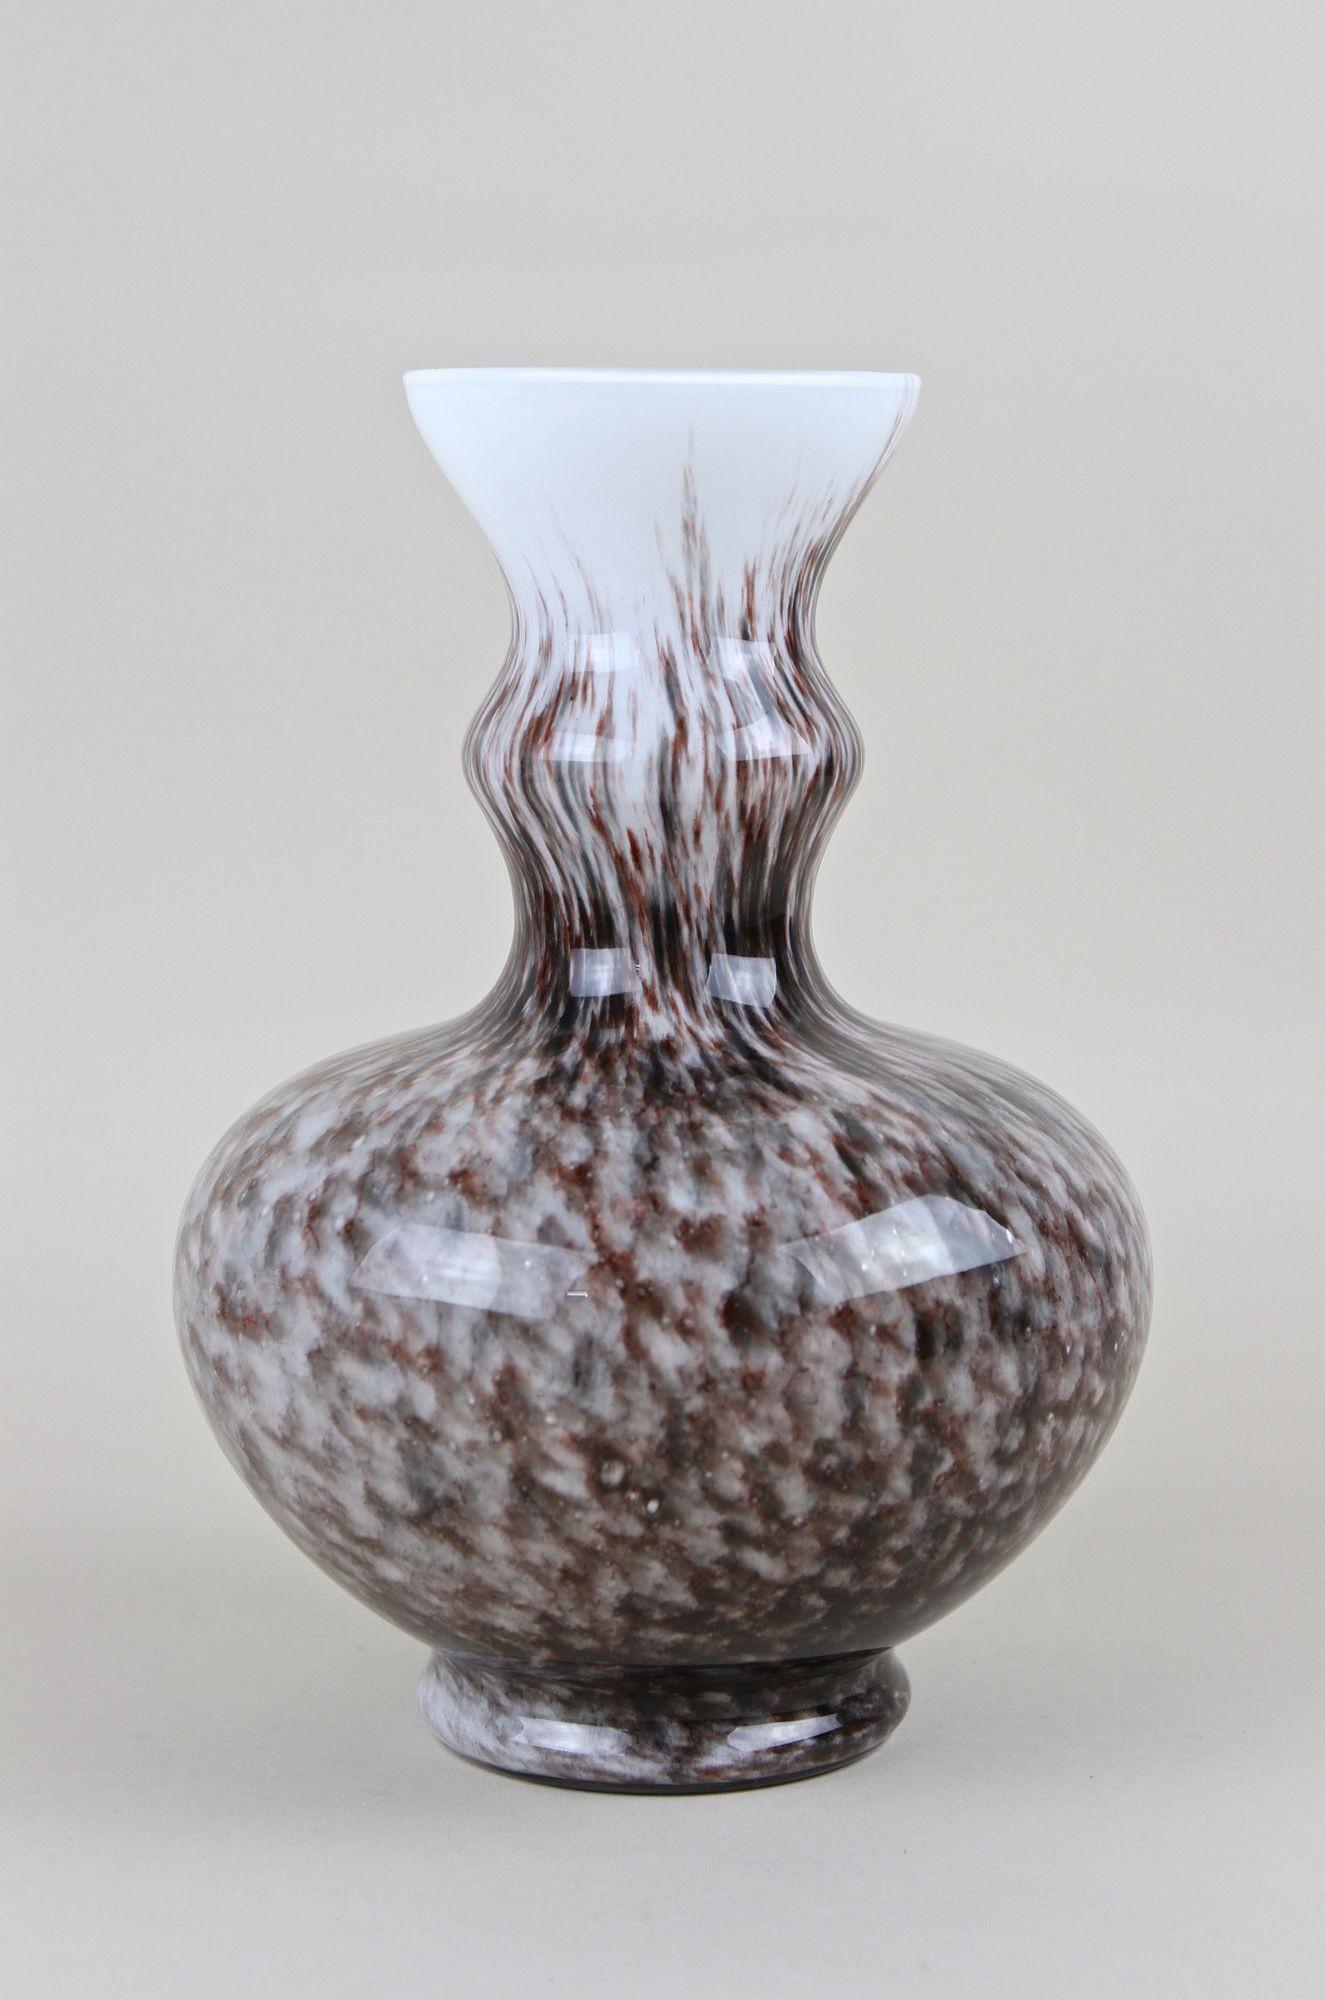 Bulbous Murano Glass Vase With Brown, Grey & Black Tones, Italy circa 1970 For Sale 10